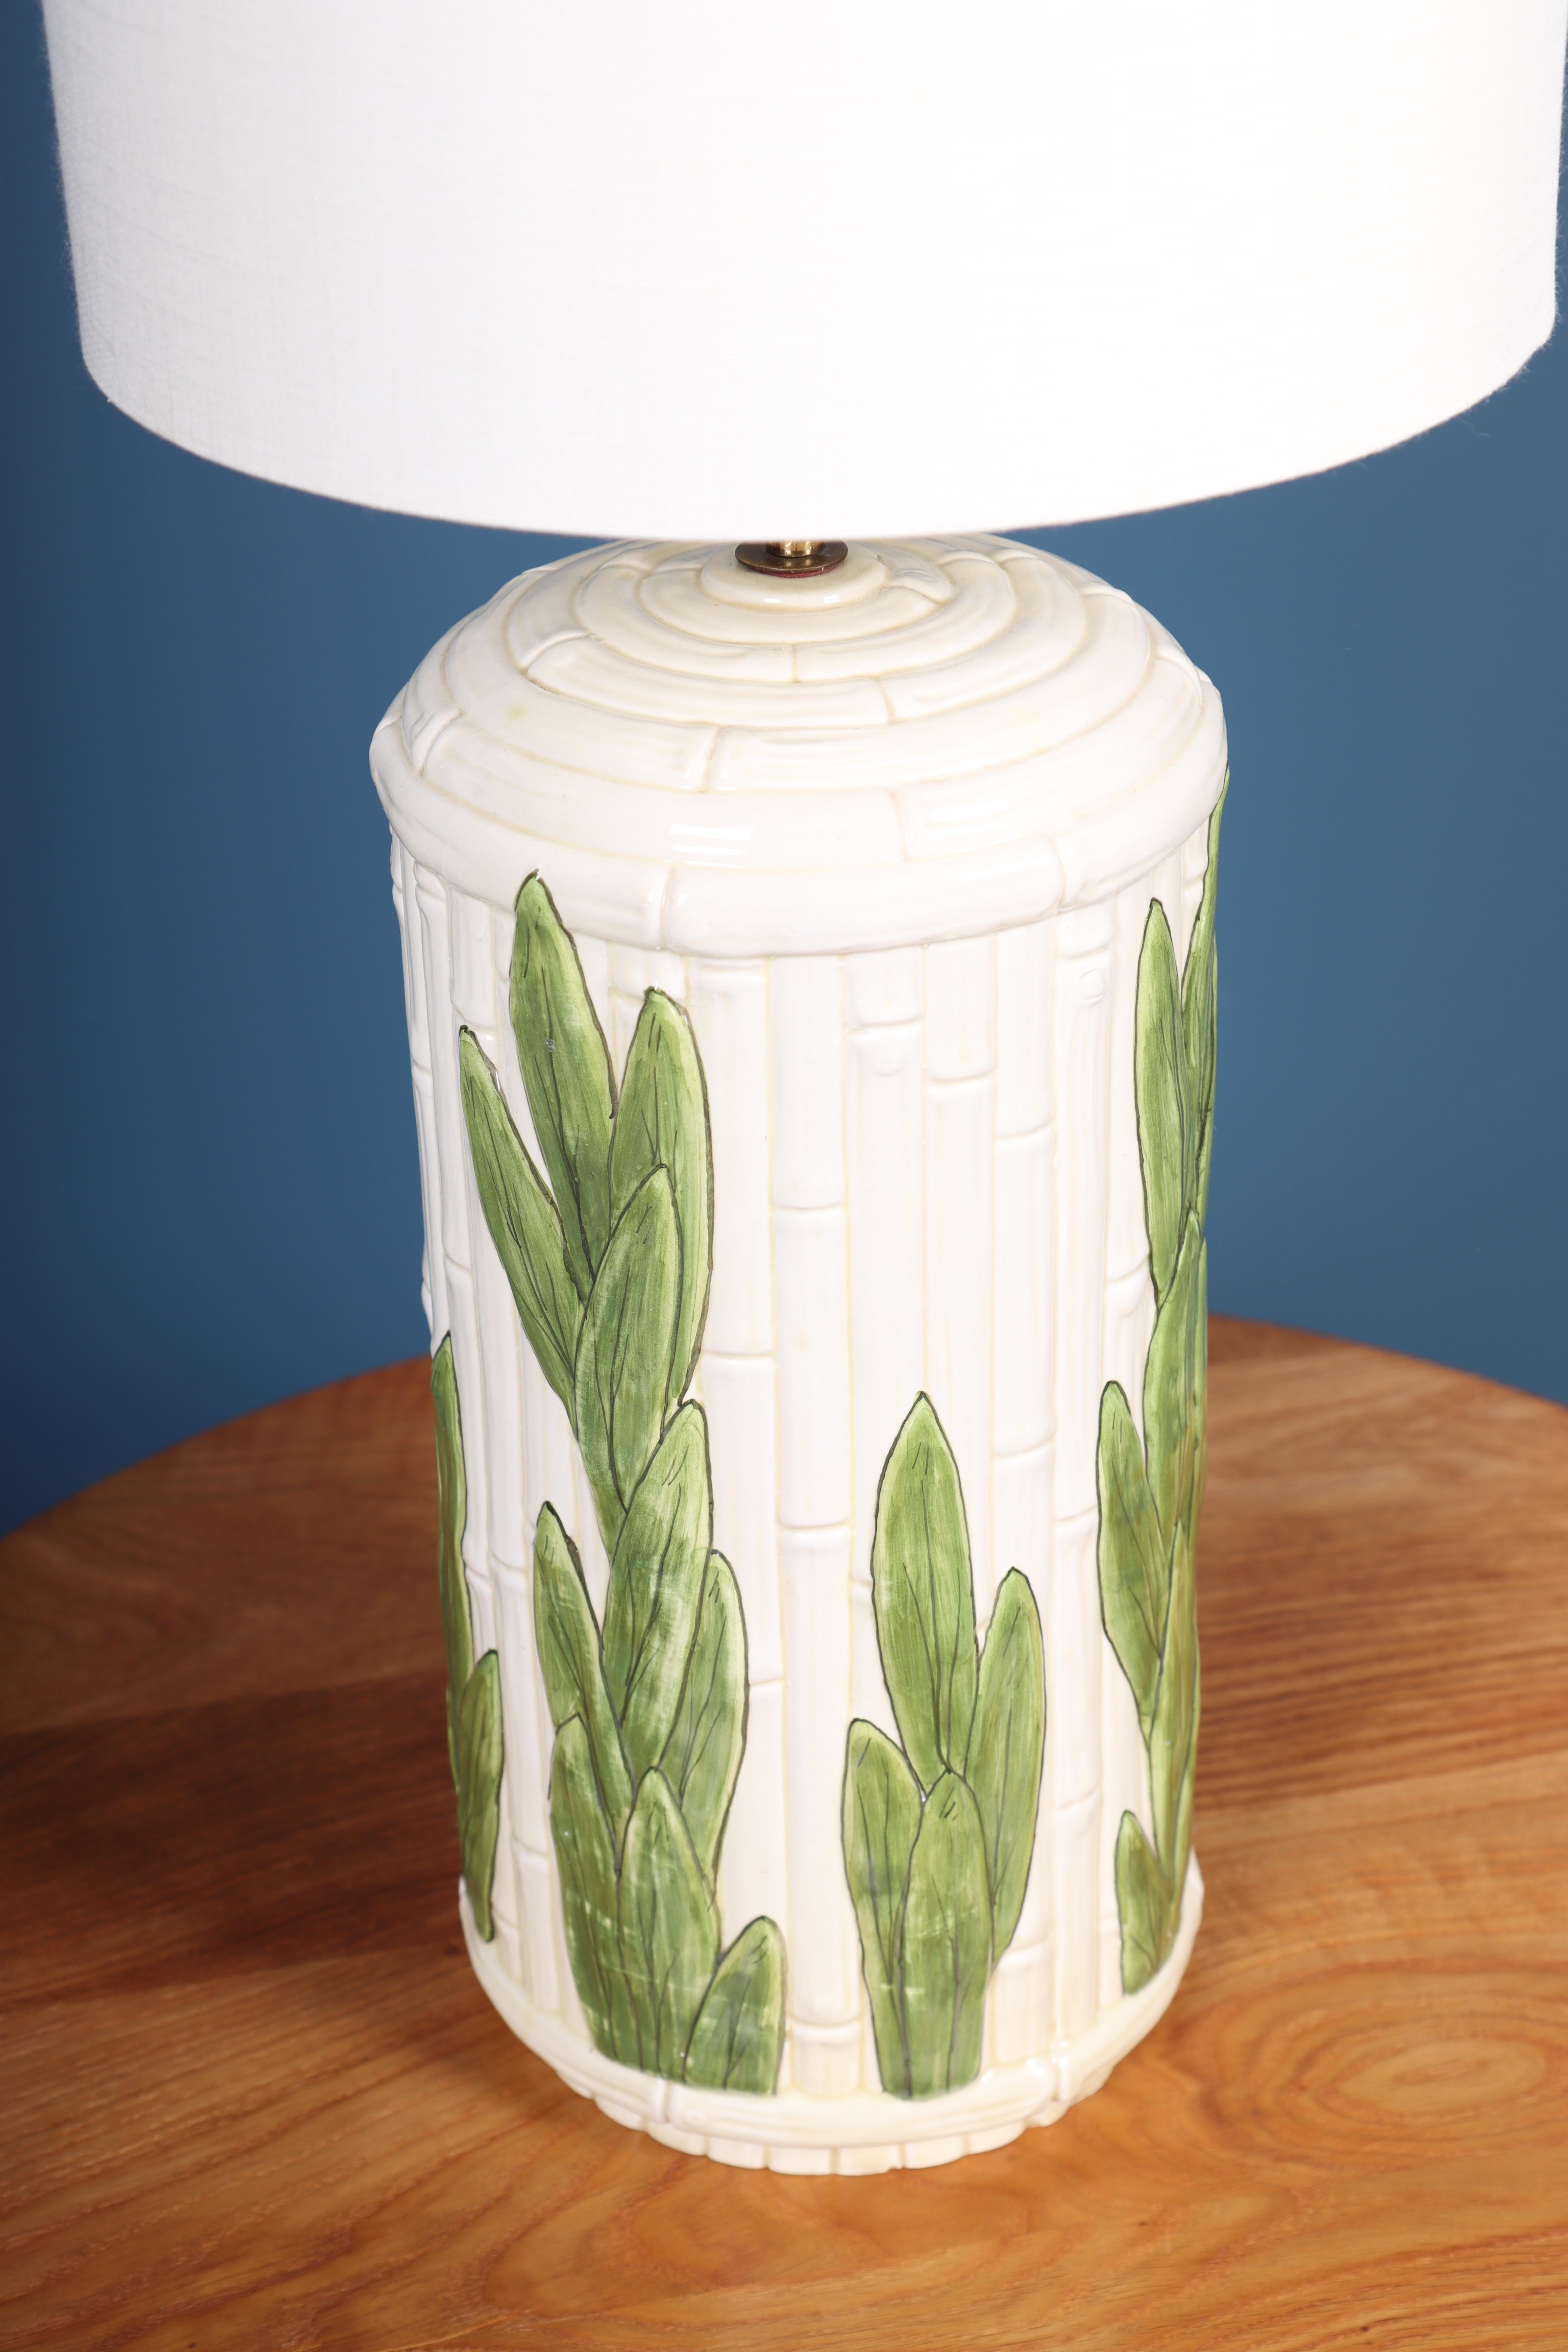 Scandinavian Modern Mid-Century Table Lamp in Ceramic by COSTA, 1960s For Sale